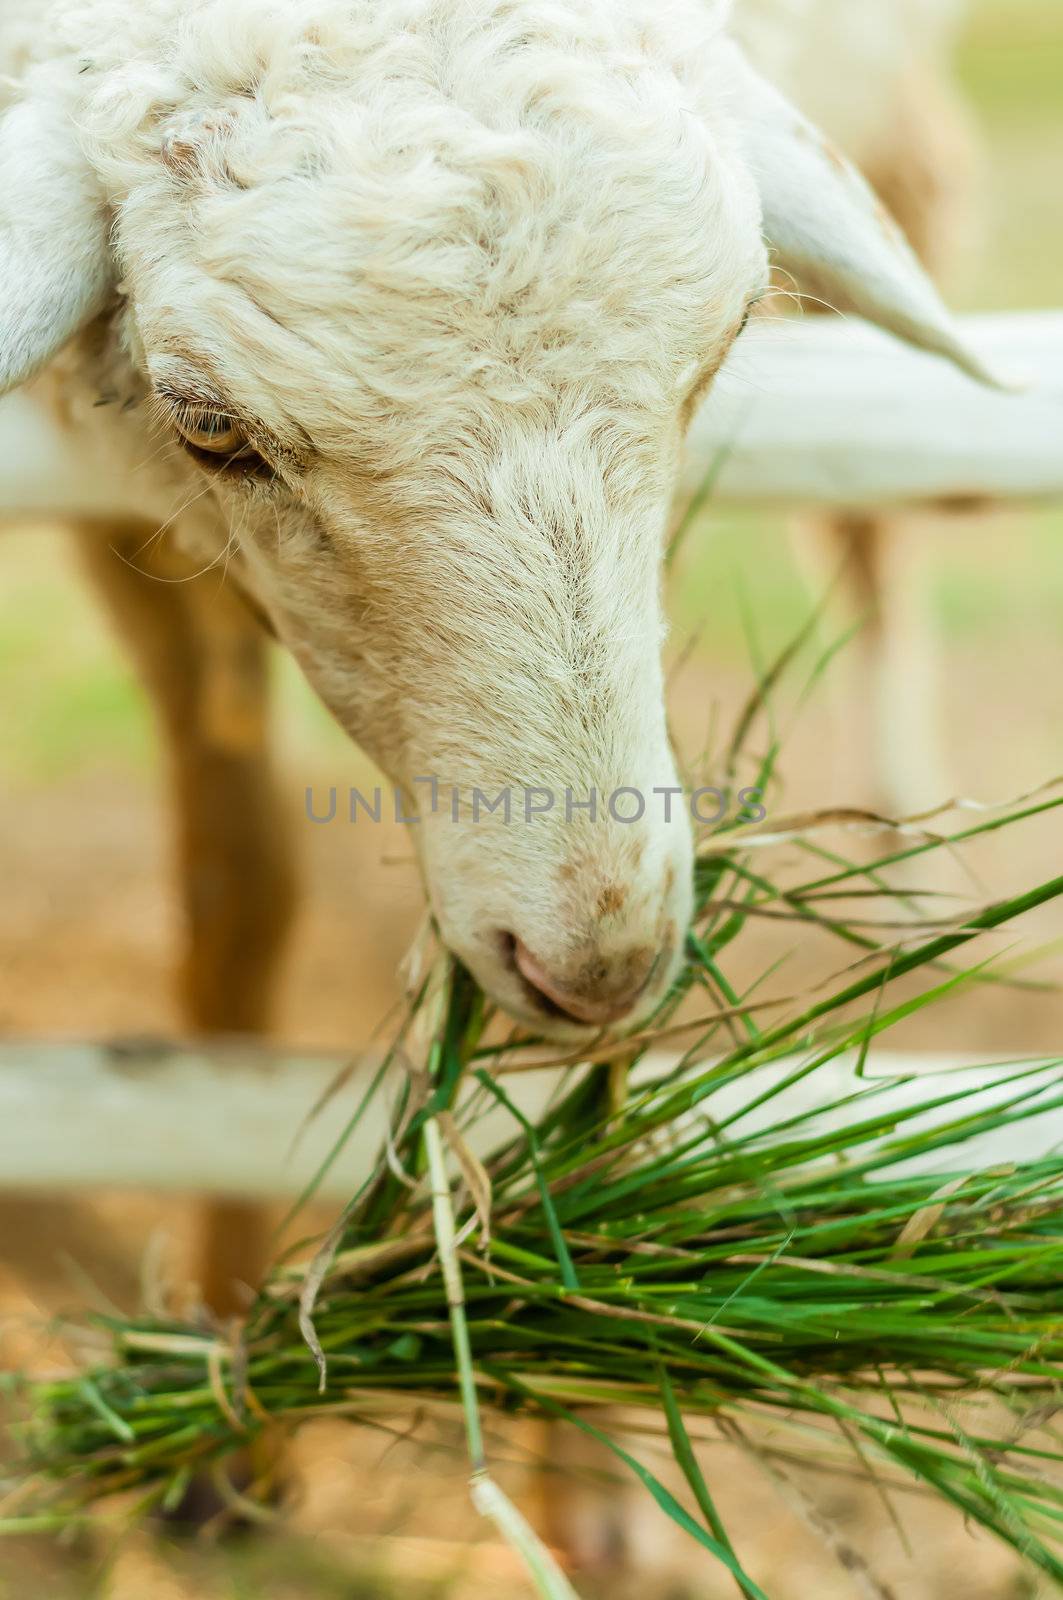 Sheep eating grass in corral with naturelight